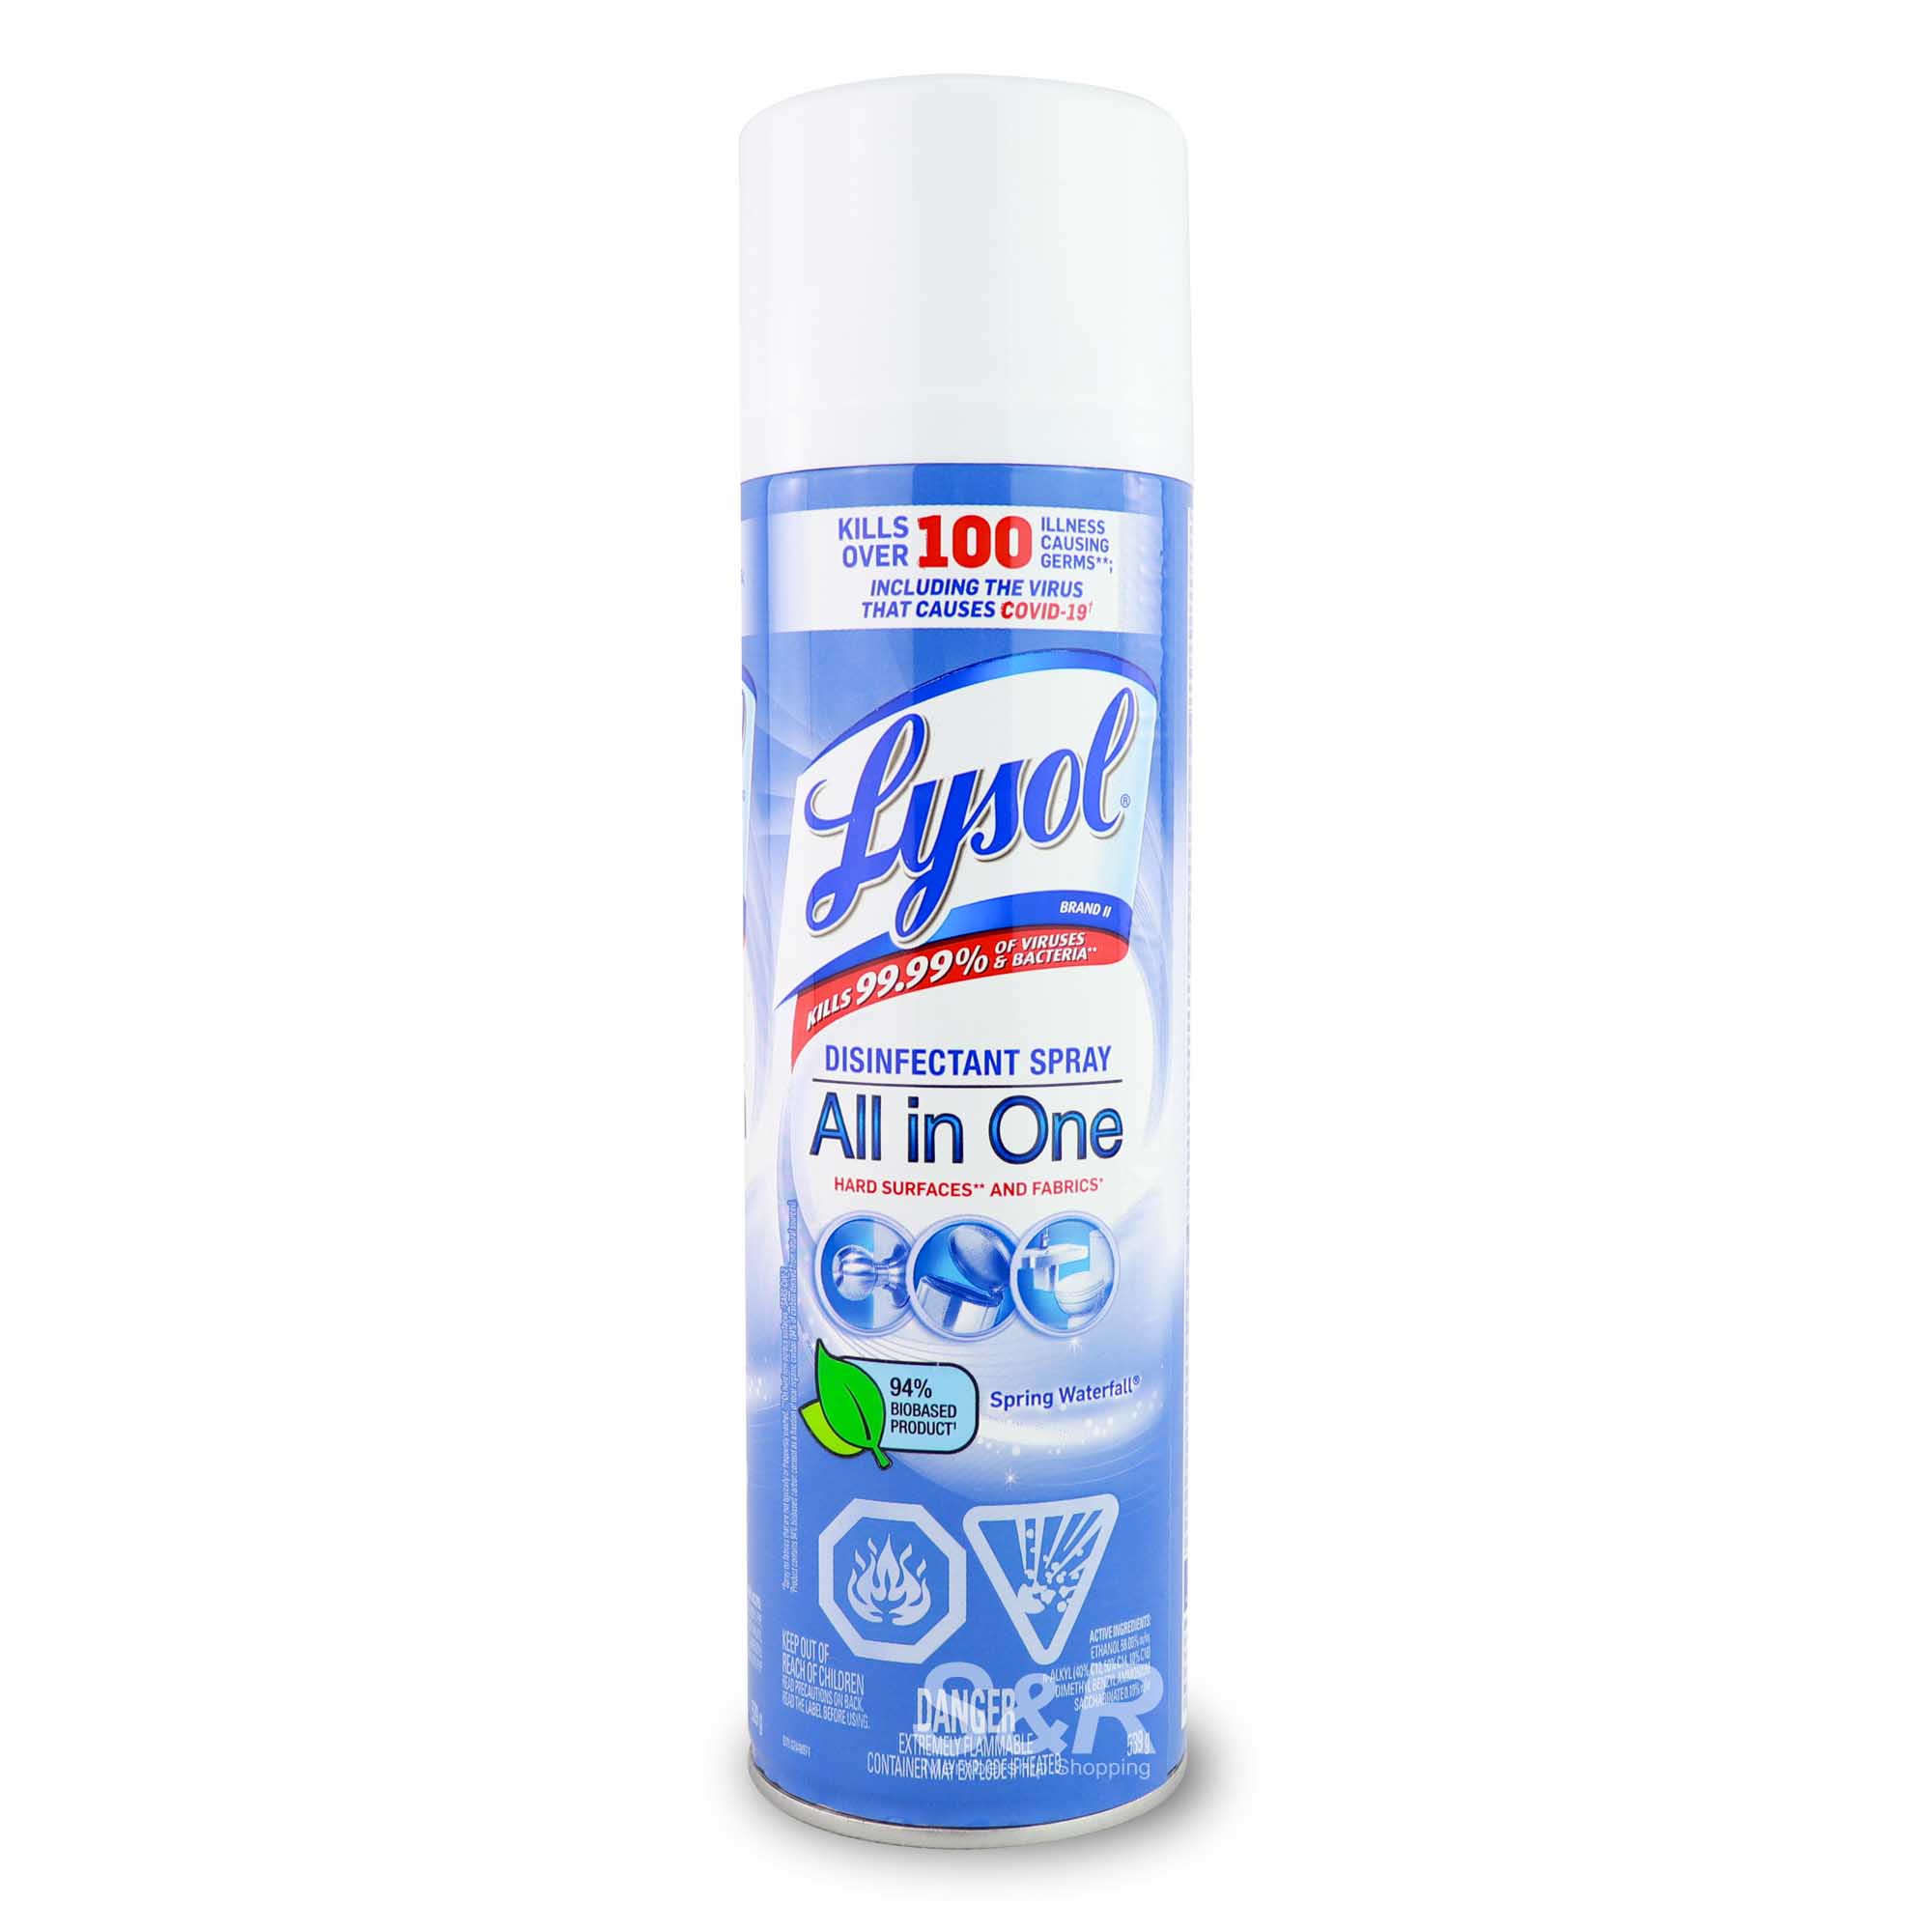 Lysol Spring Waterfall All in One Disinfectant Spray 539g